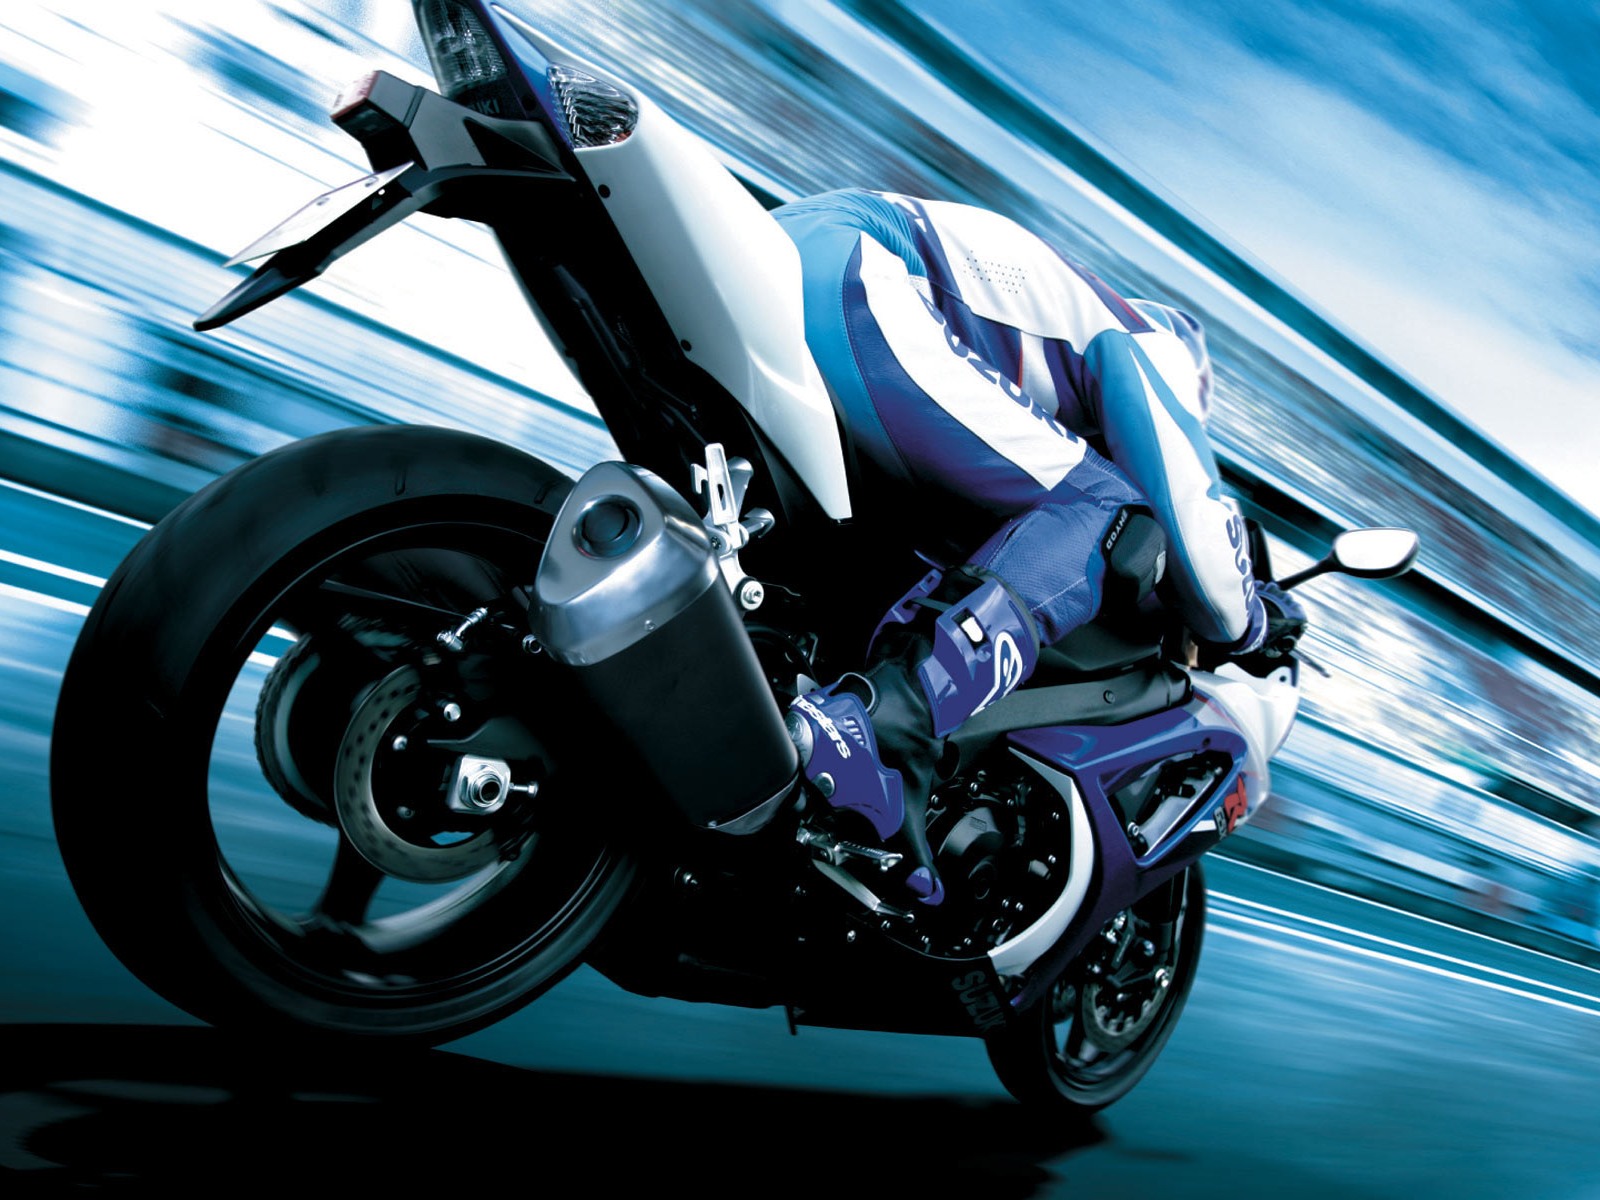 Download background vehicles, motorcycle, motorcycles